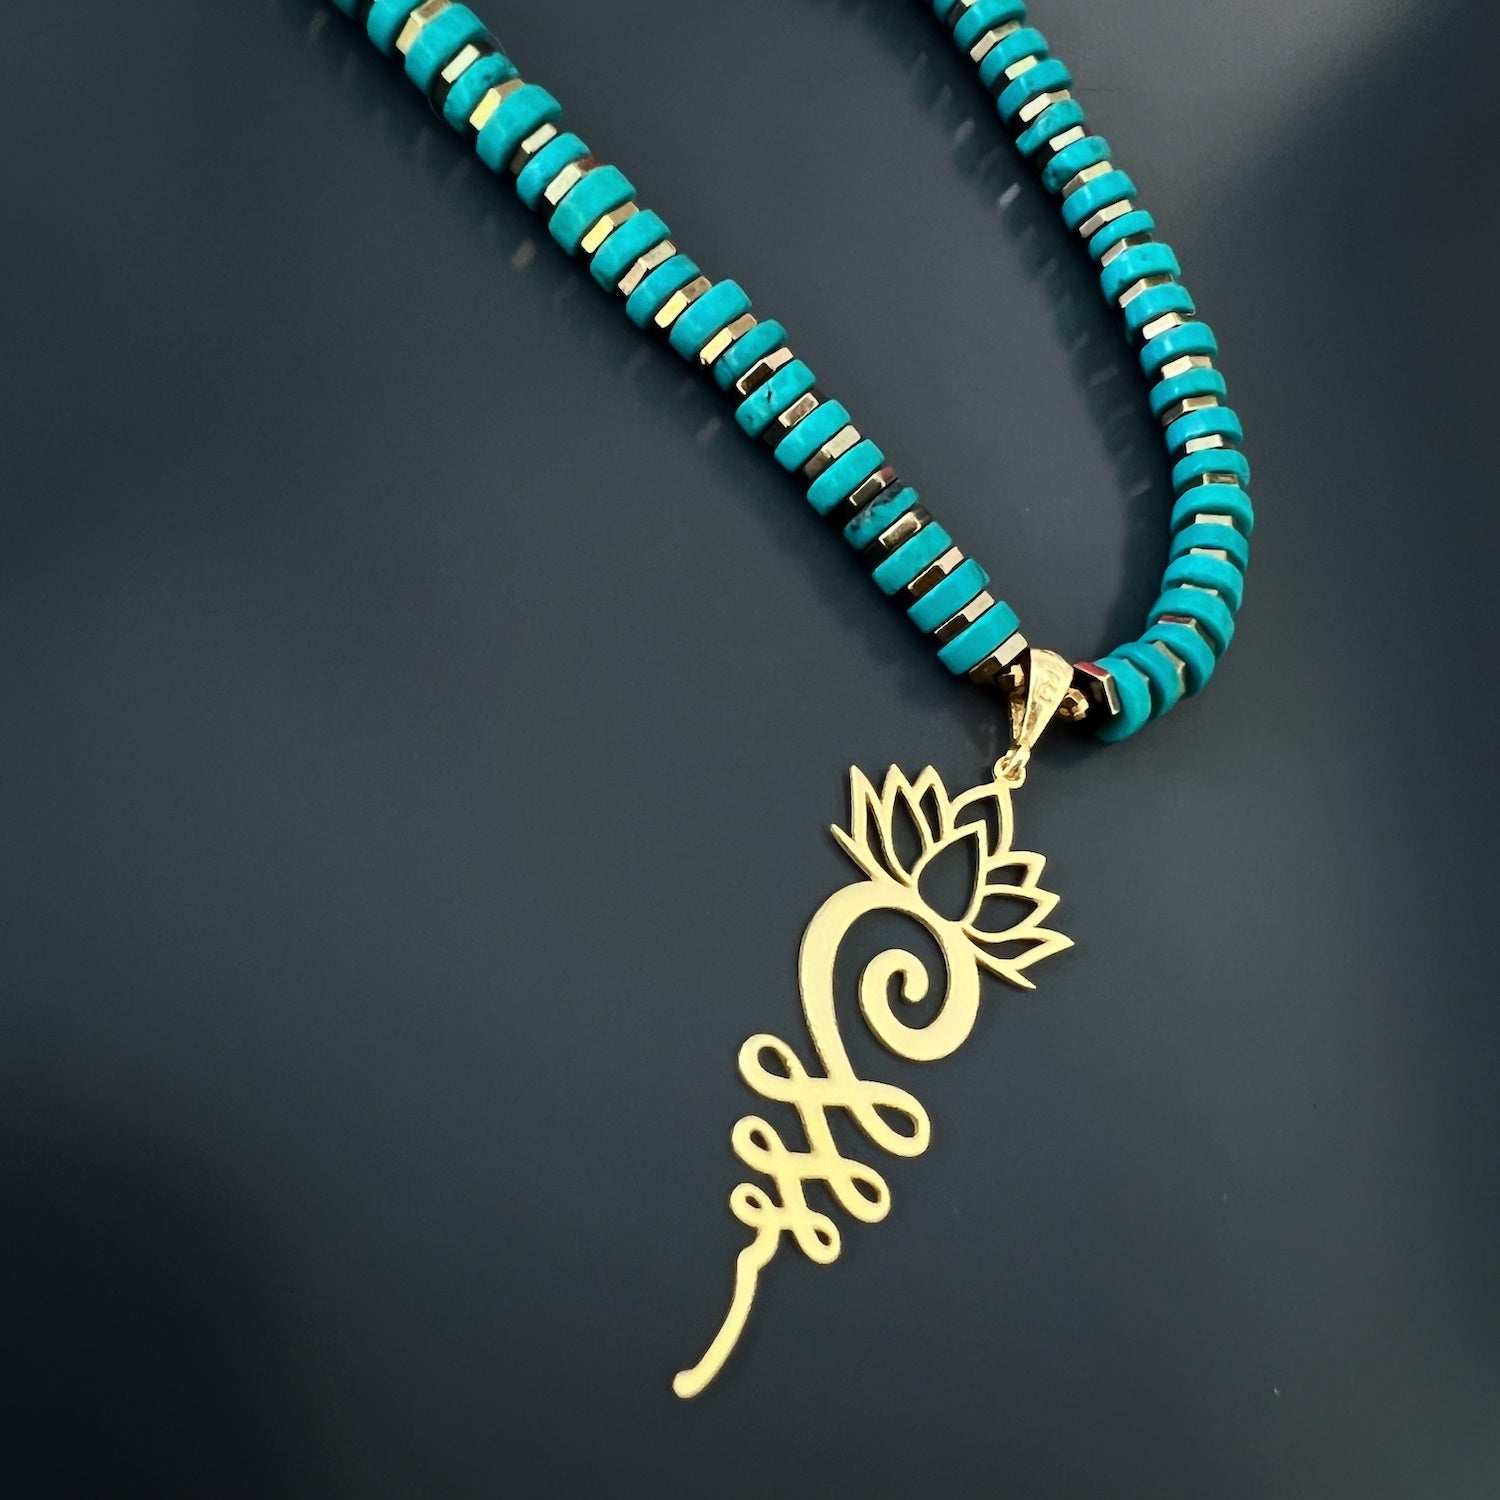 The symbolic Unalome Pendant on the Turquoise Unalome Serenity Necklace, representing the journey to enlightenment